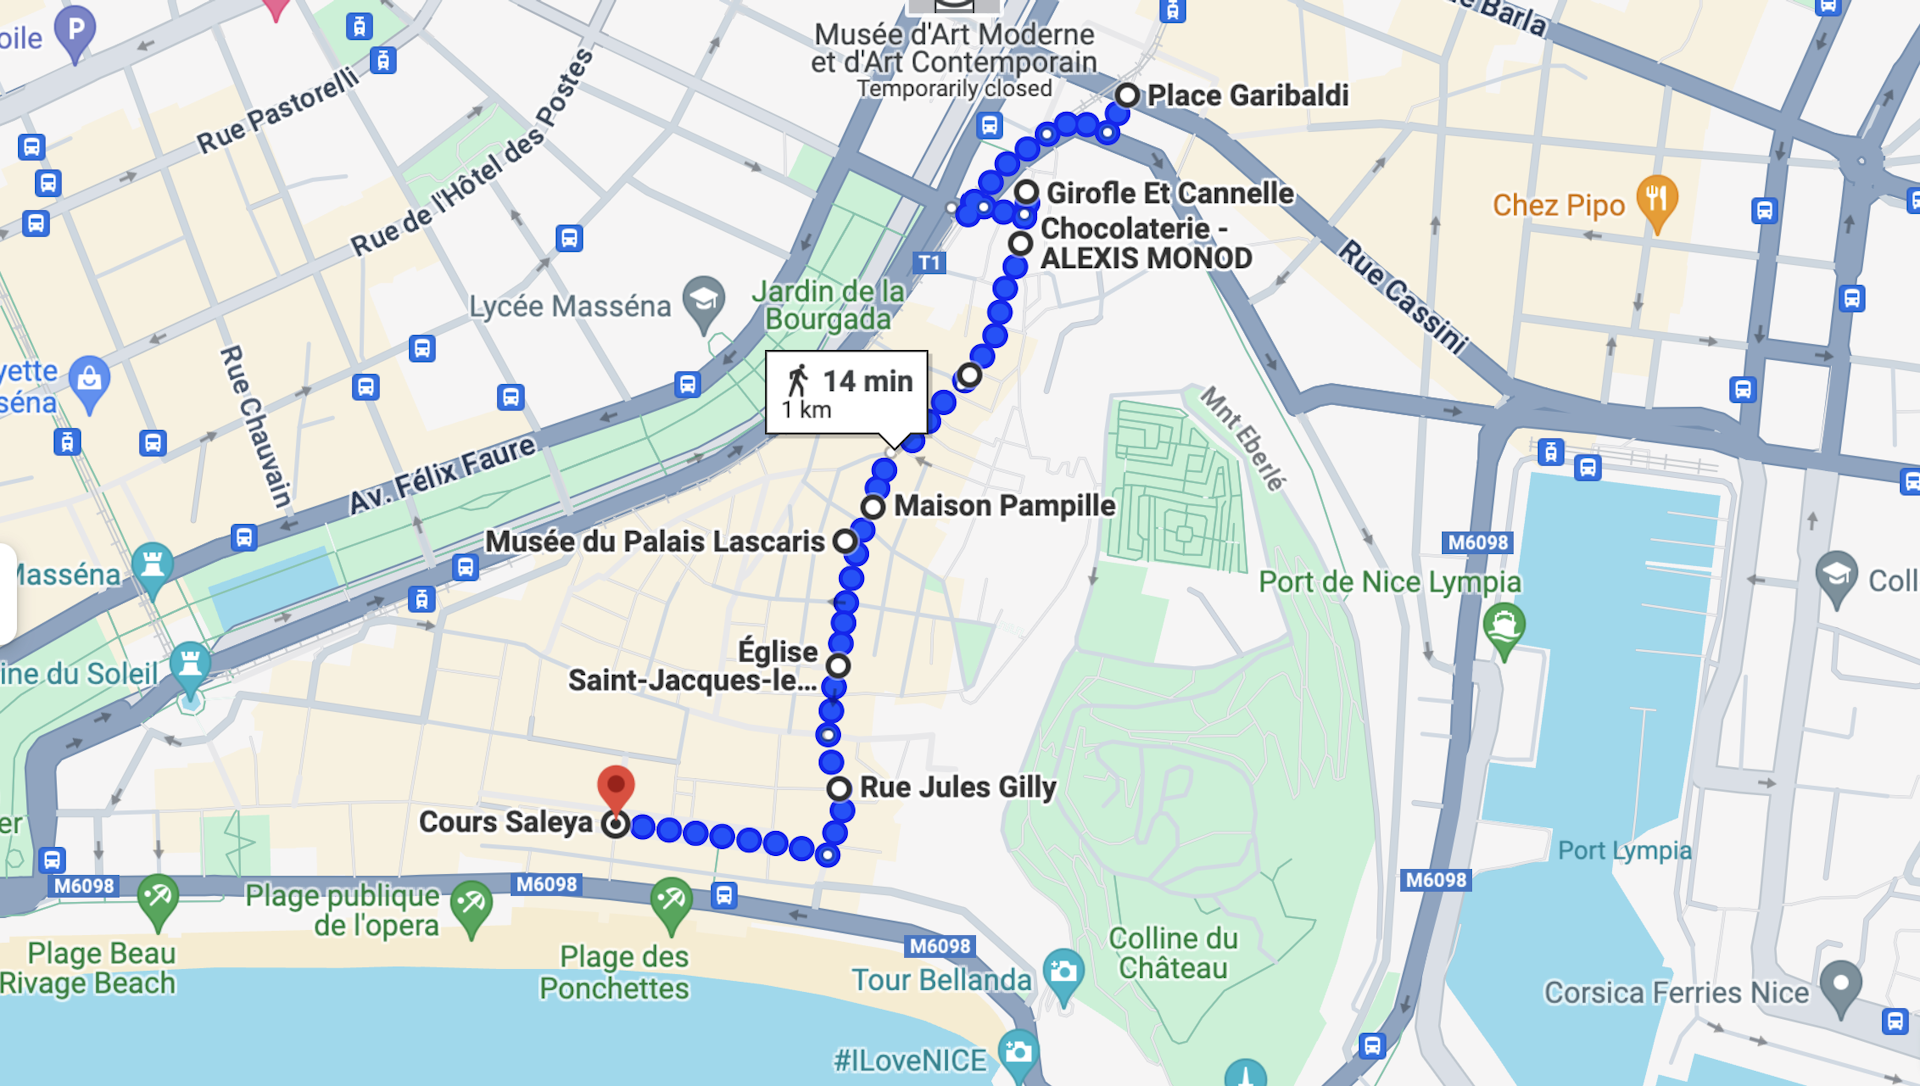 Walking route of Nice's Old Town mapped out in Google Maps